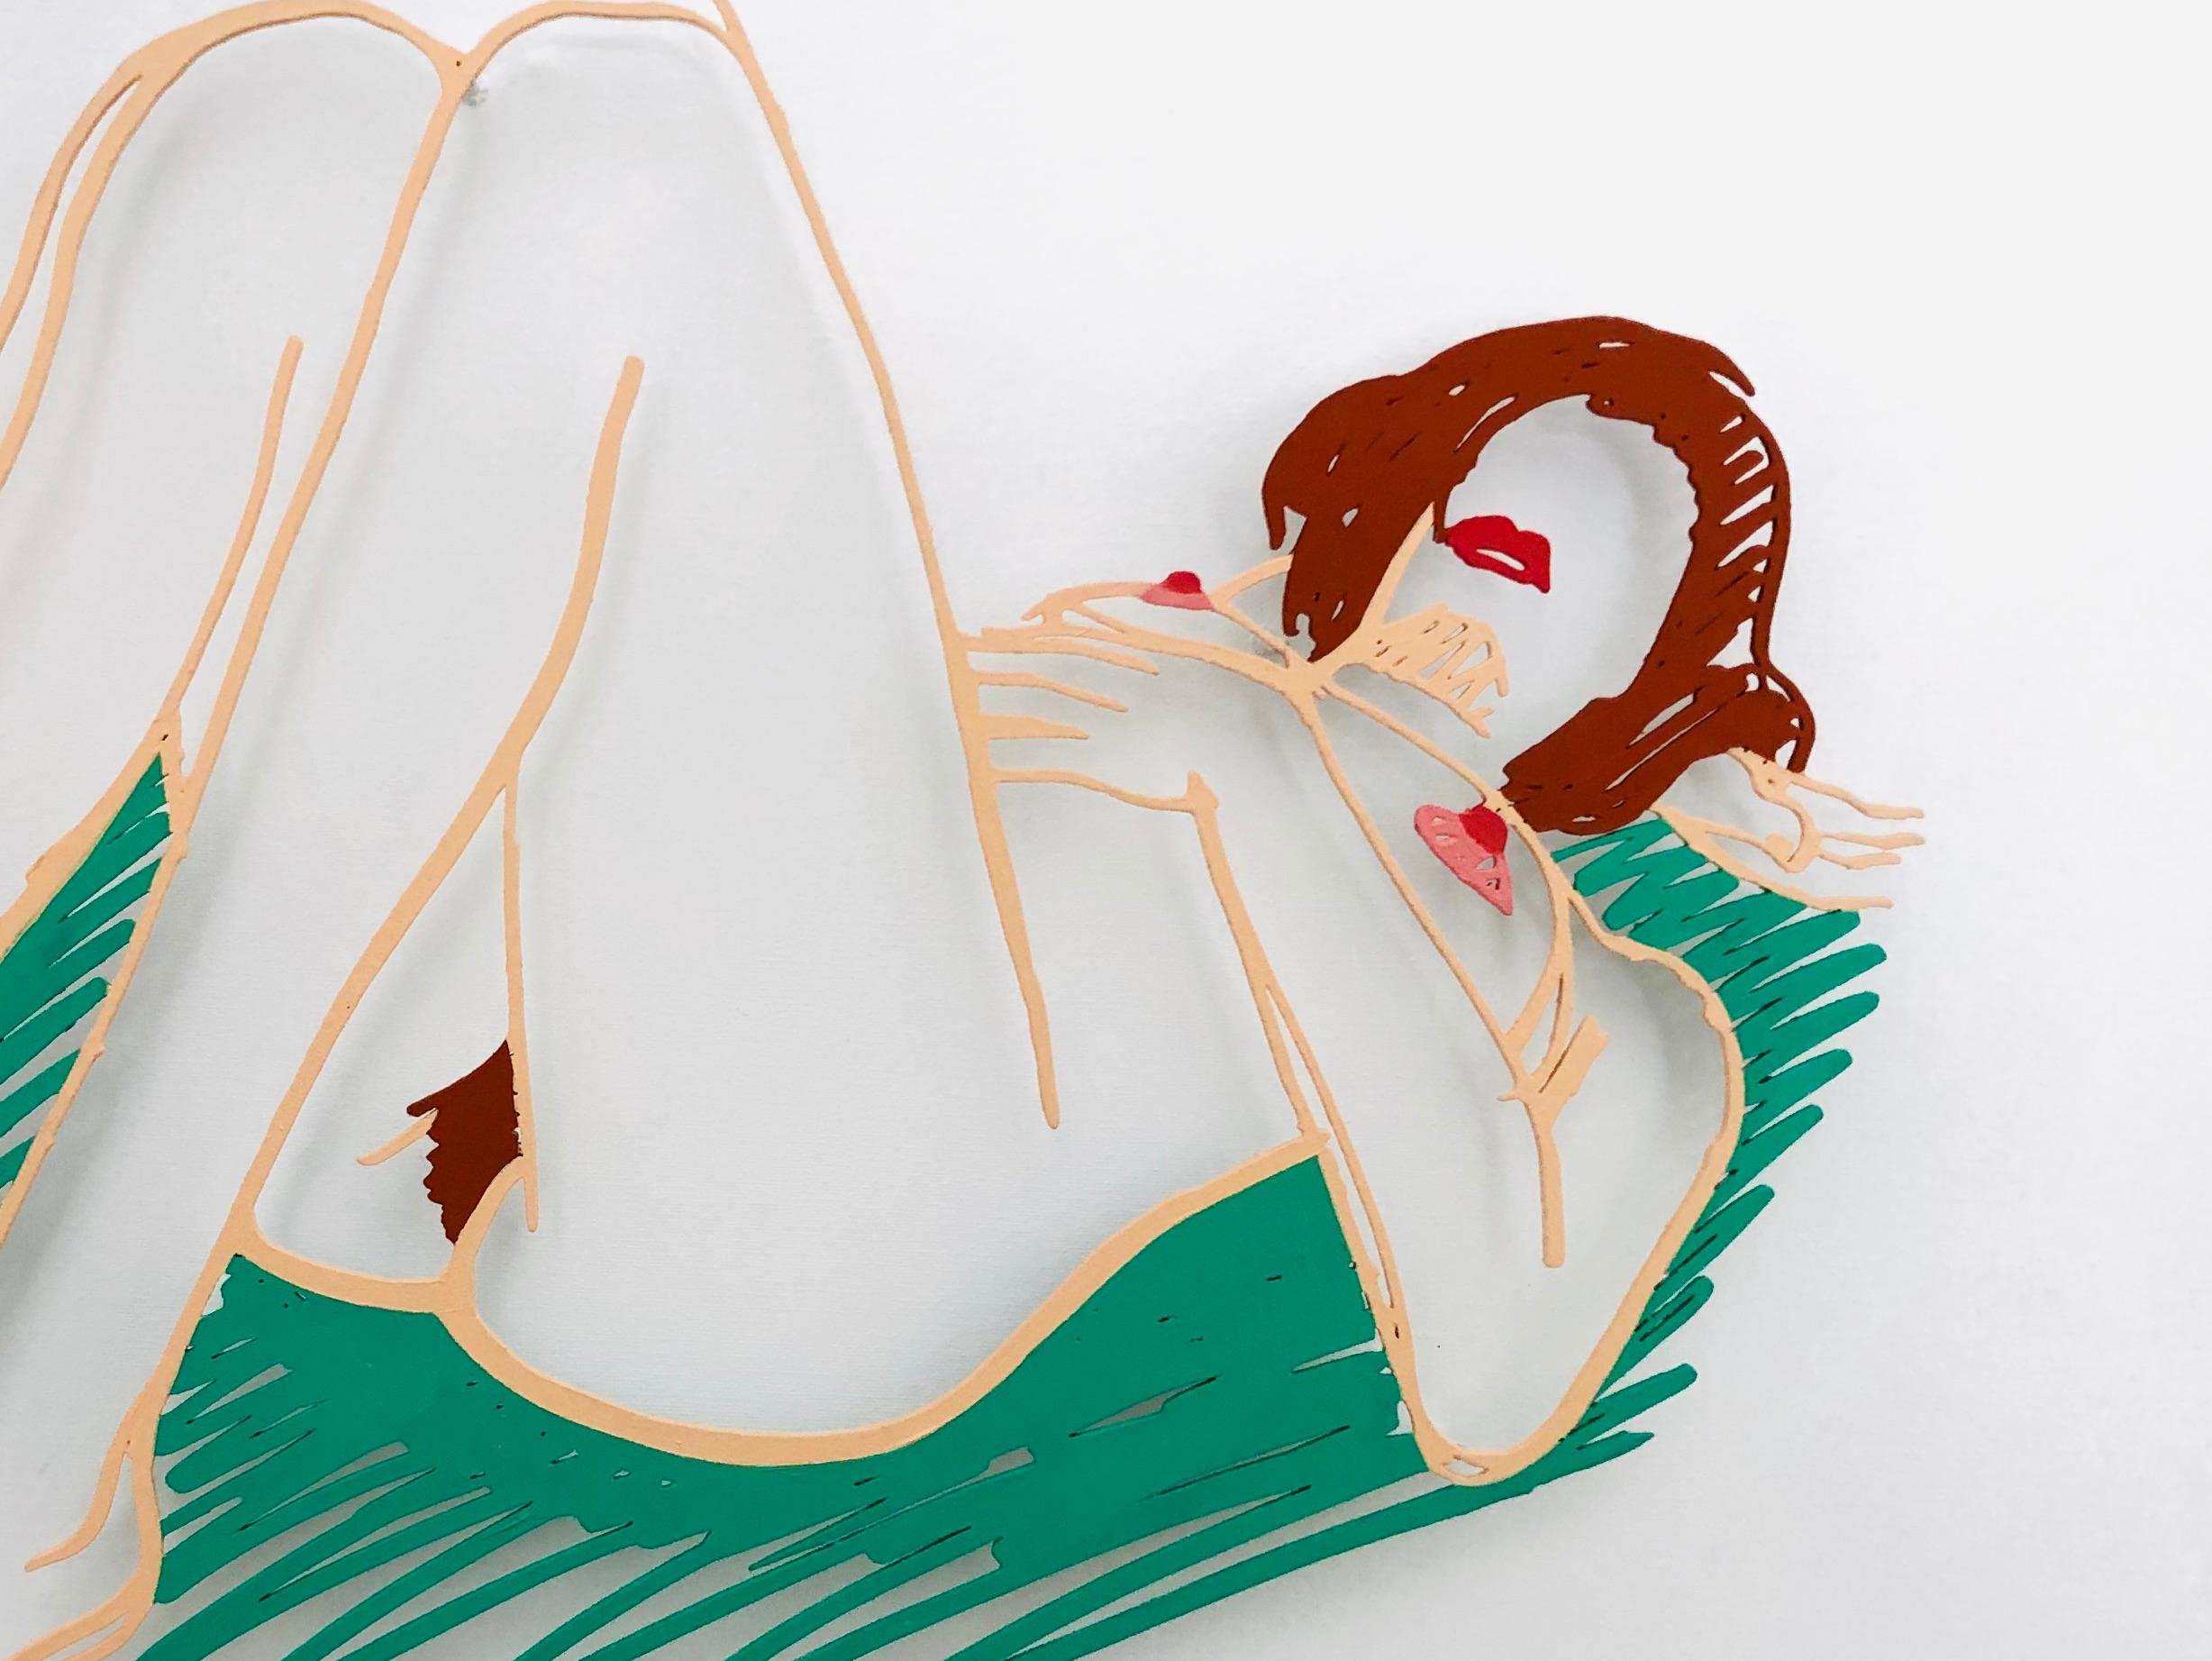 Tom Wesselmann
Blonde on Blanket, 1985/98
Alkyd oil on cut-out Steel
25.4 x 31.75 cm  10 x 12 1/2 in
signed dated and numbered on verso: AP 6/6
This work is a unique color variant.

Tom Wesselmann's most productive phase of his career began with the